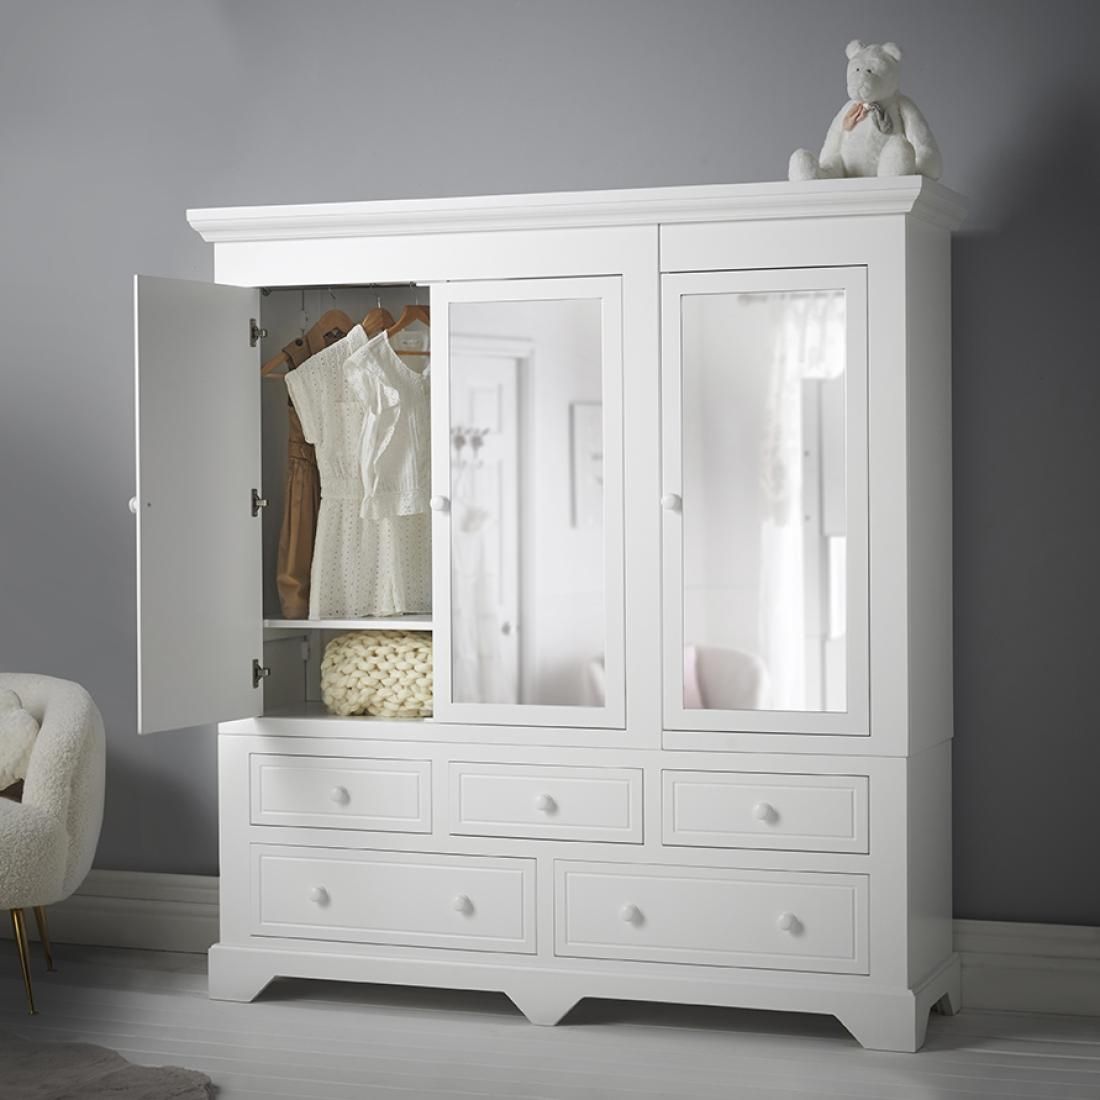 Evie Crabtree Mirrored 3 Door Combination Wardrobe | Luxury Children's  Furniture For Wardrobes And Drawers Combo (View 3 of 15)